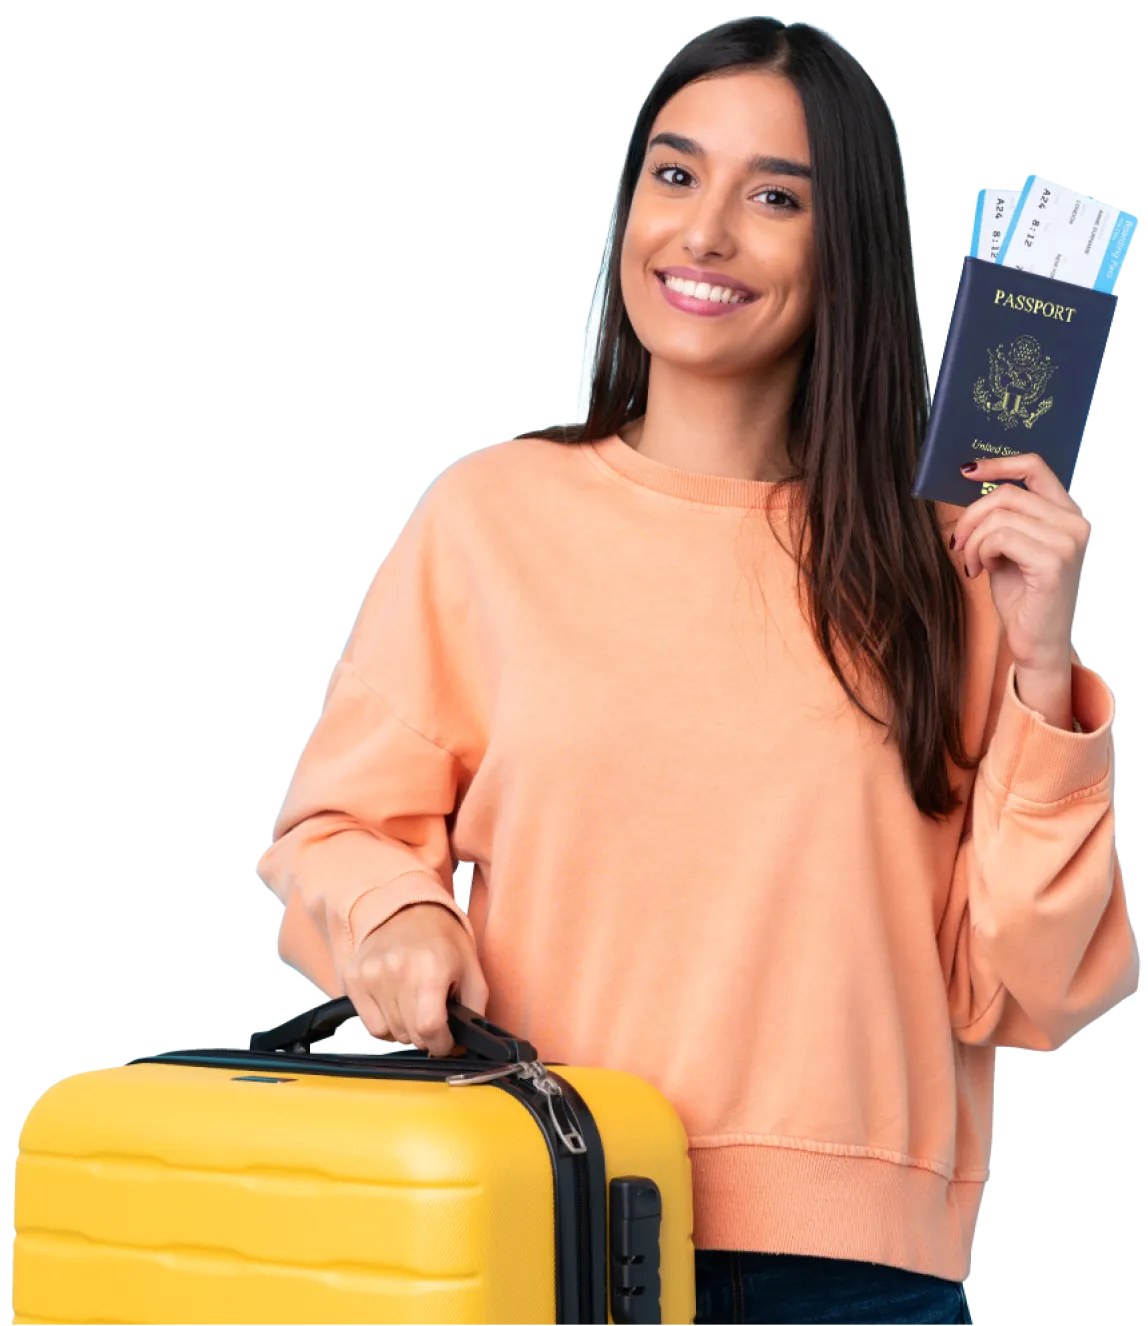 Woman holding passport with yellow suitcase